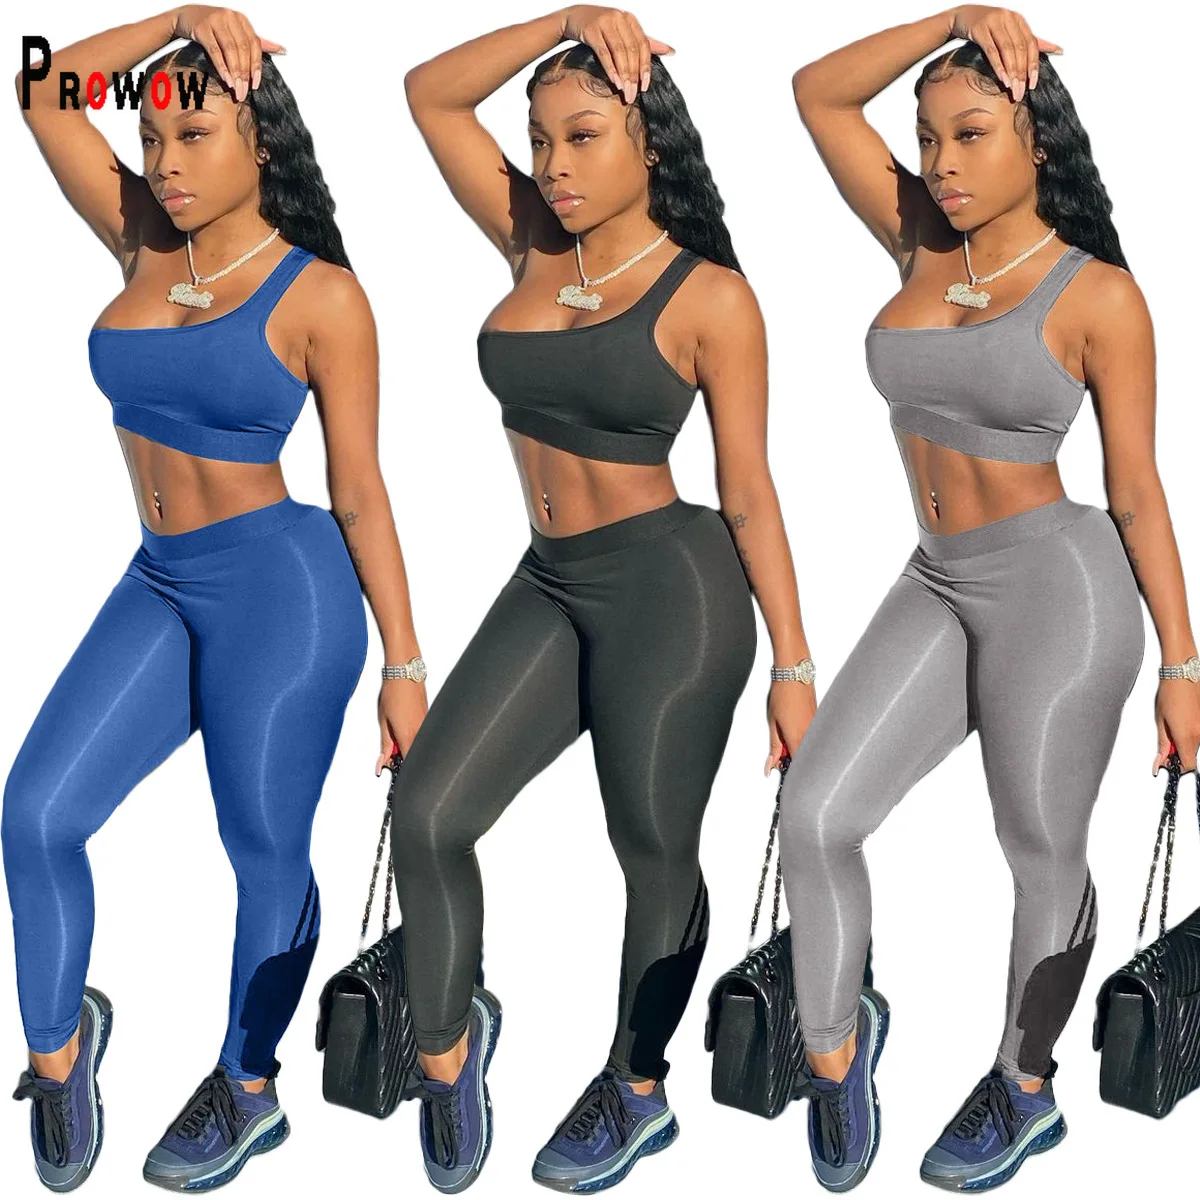 

Prowow Women Bodycon Clothing Set Skew Collar Tops Long Pant Two Piece Matching Suits 2021 New Summer Fitness Joggers Outfits